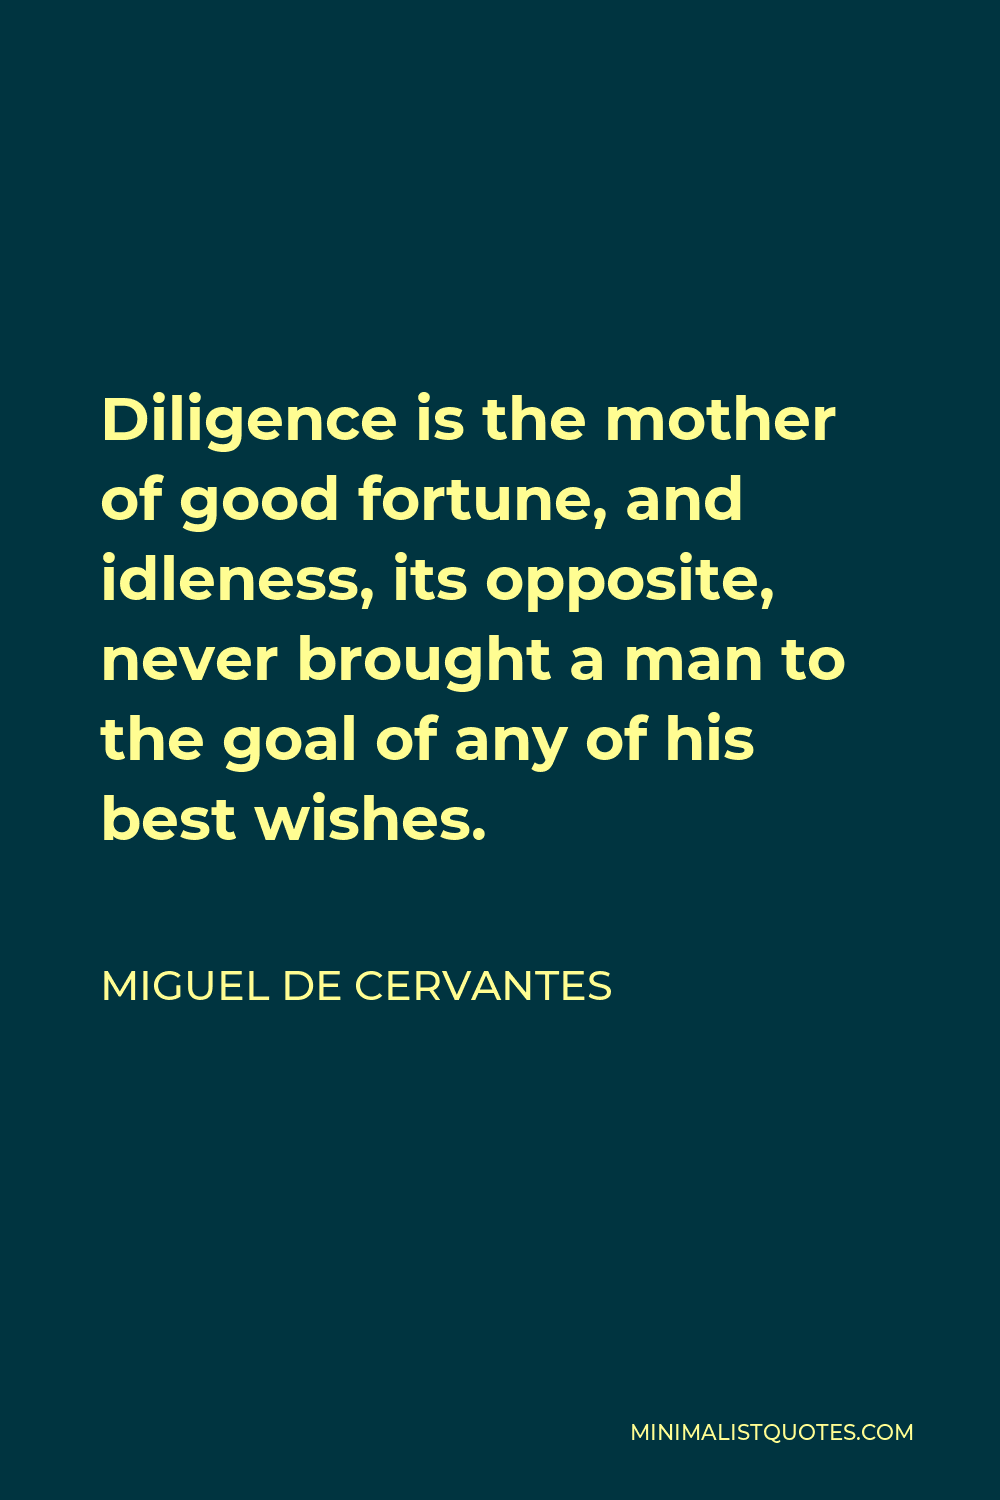 Miguel de Cervantes Quote - Diligence is the mother of good fortune, and idleness, its opposite, never brought a man to the goal of any of his best wishes.